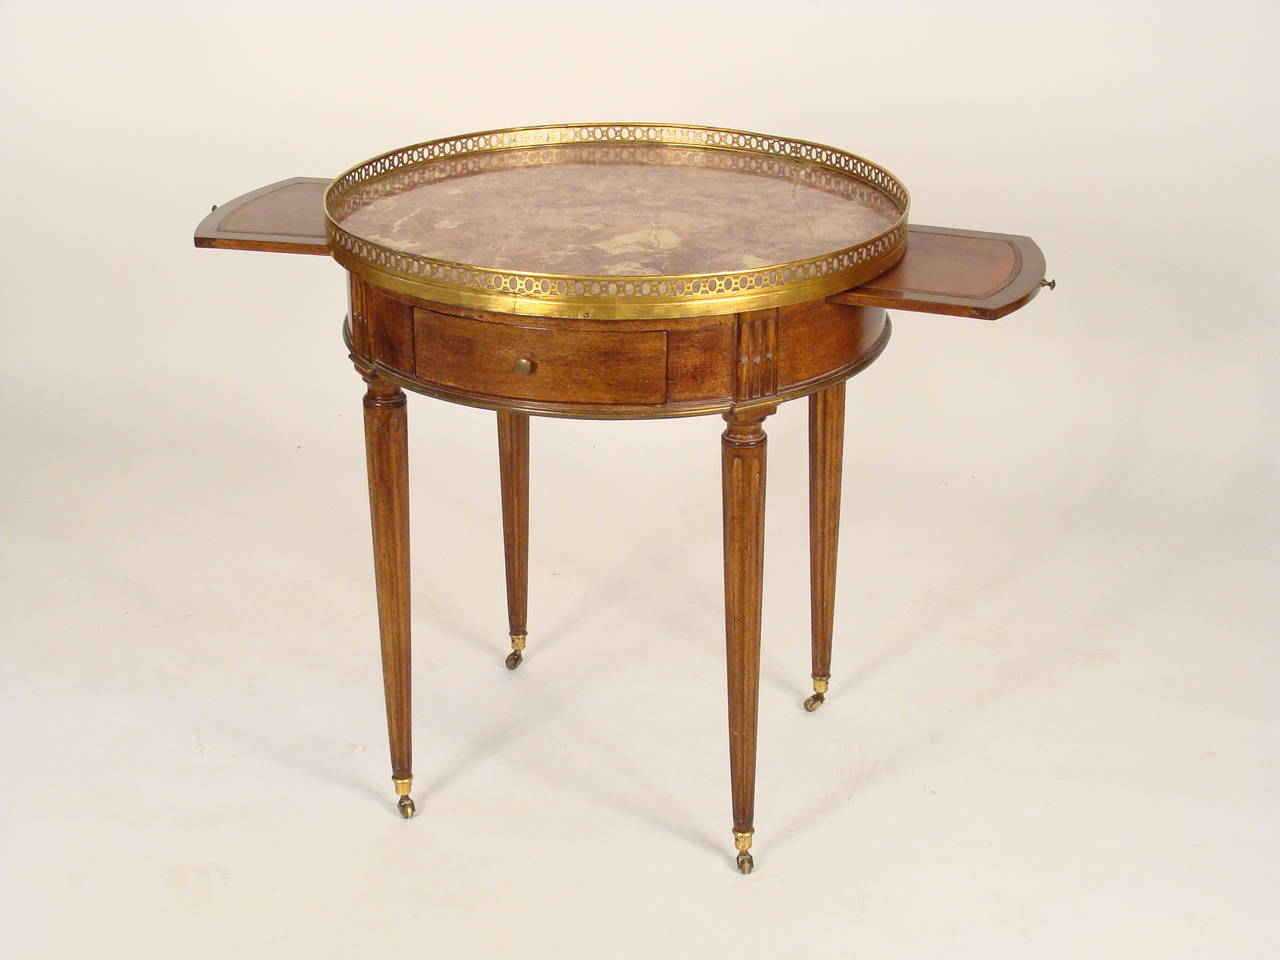 Louis XVI style brass mounted mahogany bouillotte table with a marble top, circa 1900. The height is 28.25